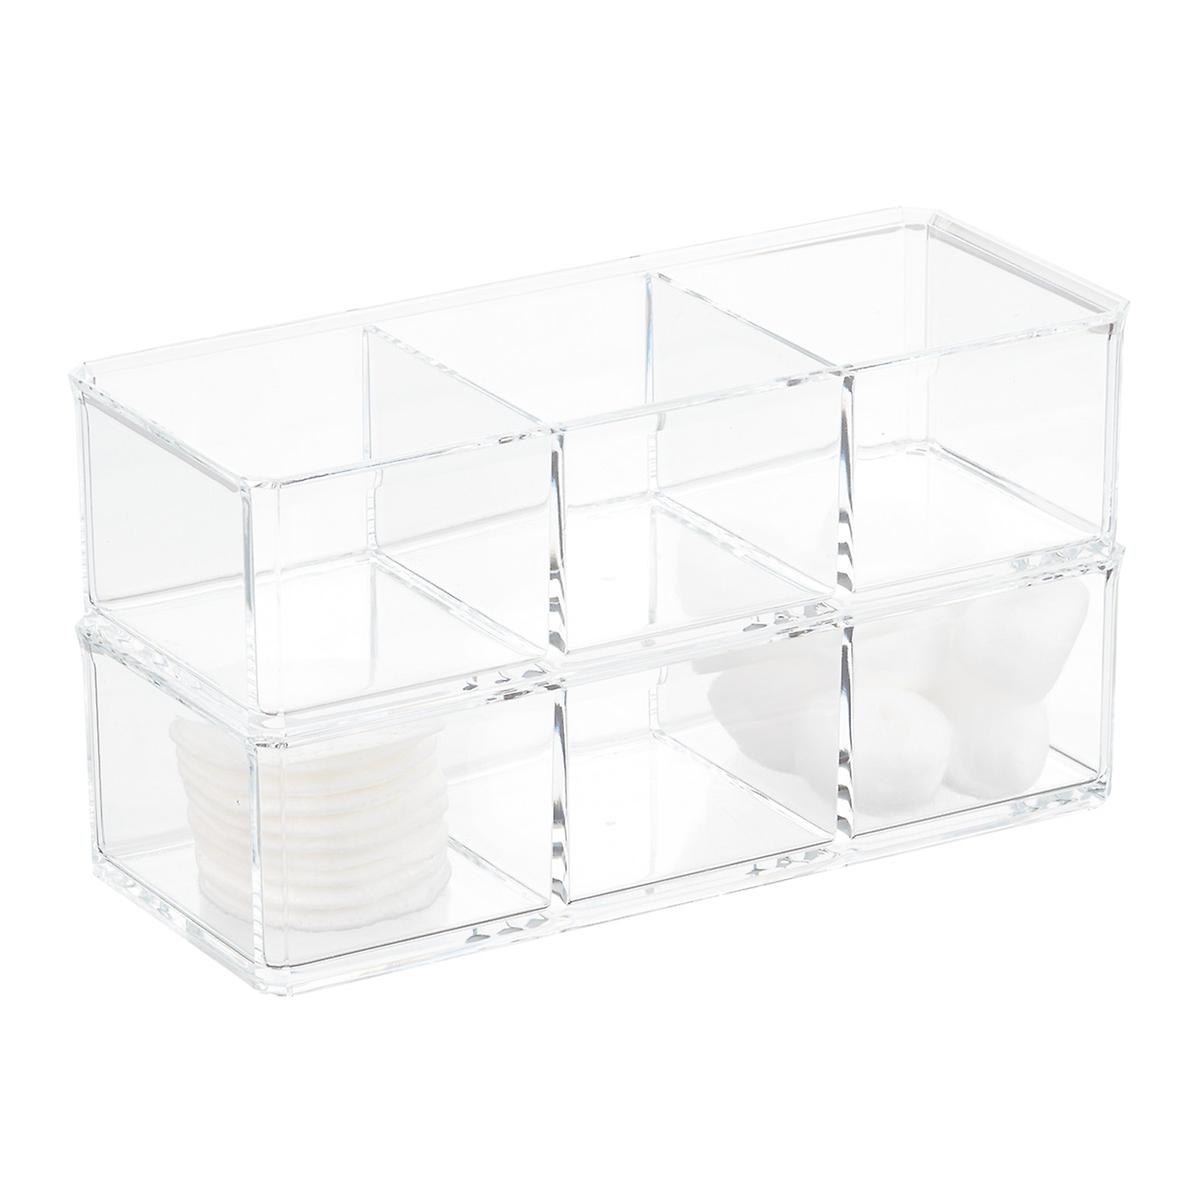 3-Section Acrylic Edge Stacking Bin | The Container Store